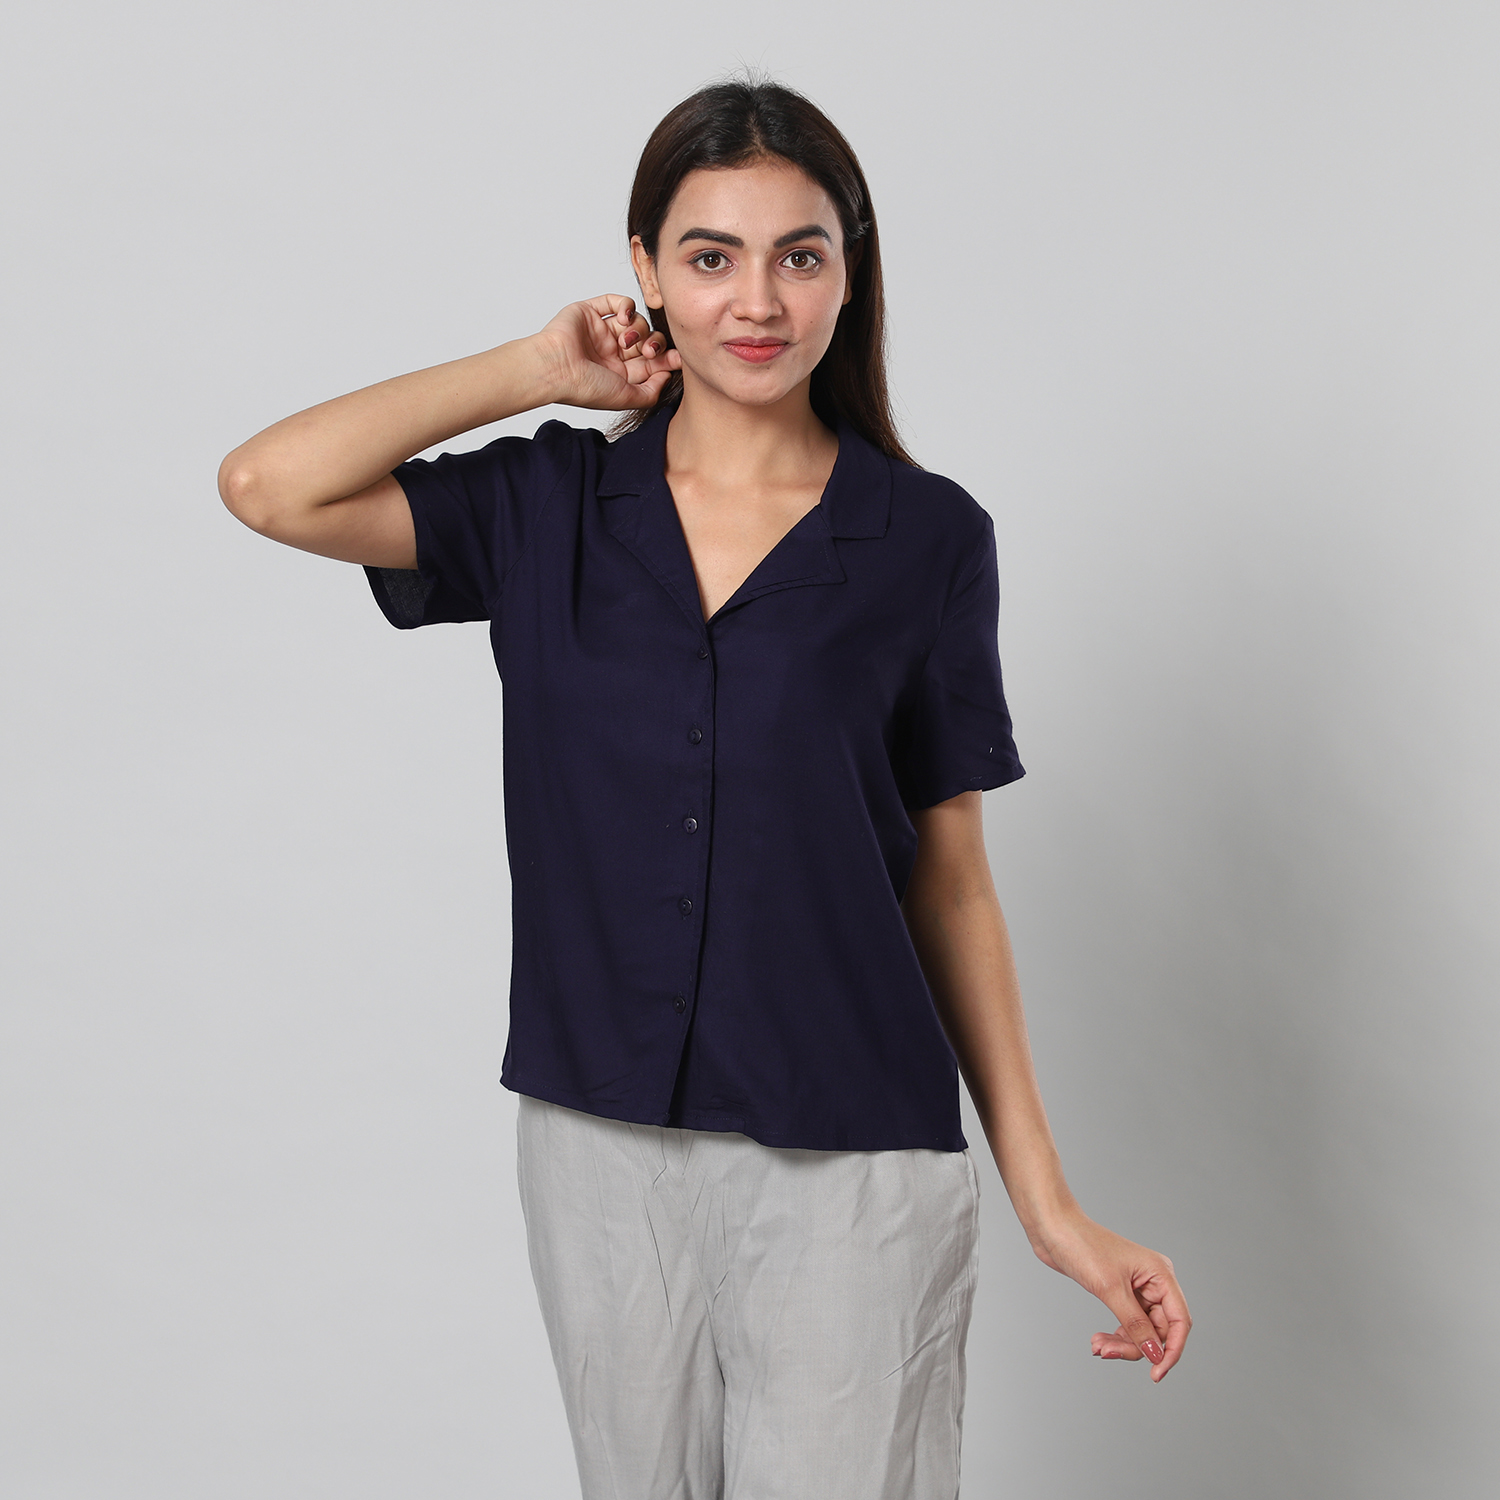 JOVIE 100% Viscose Top with Collar and Button Closure (Size:L, 61x101Cm) - Navy